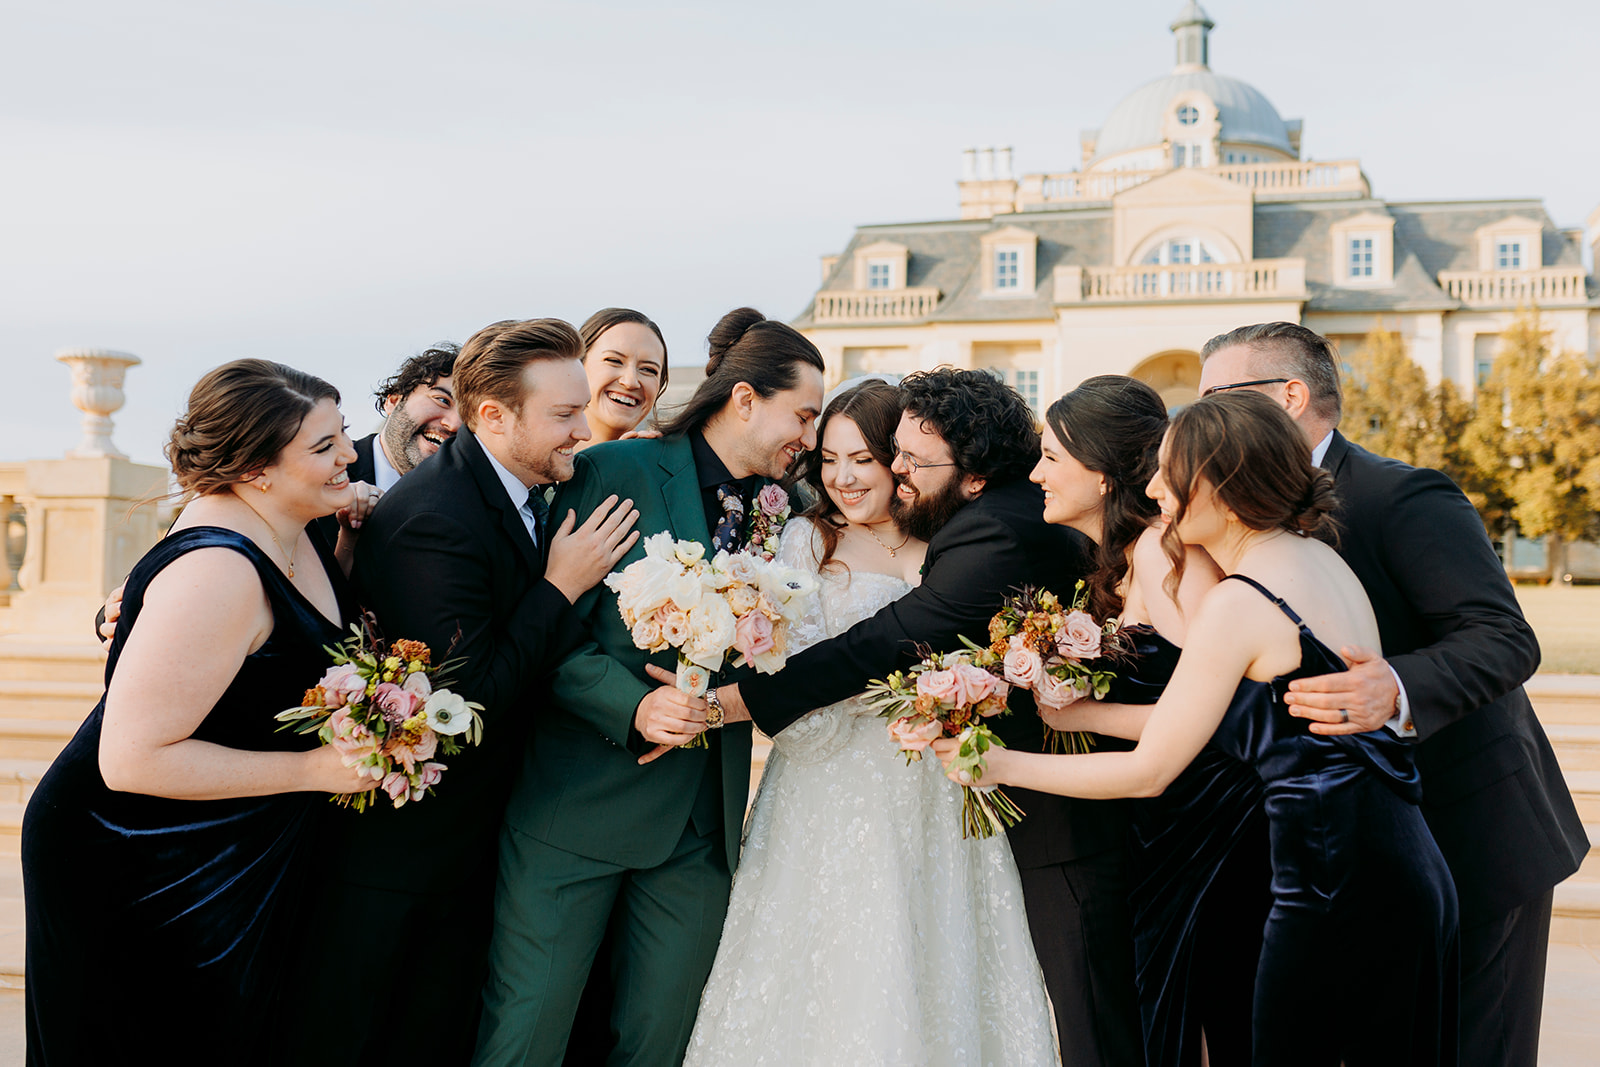 Bride and groom are surrounded and embraced by wedding party while standing in front of the extravagant facade of The Olana